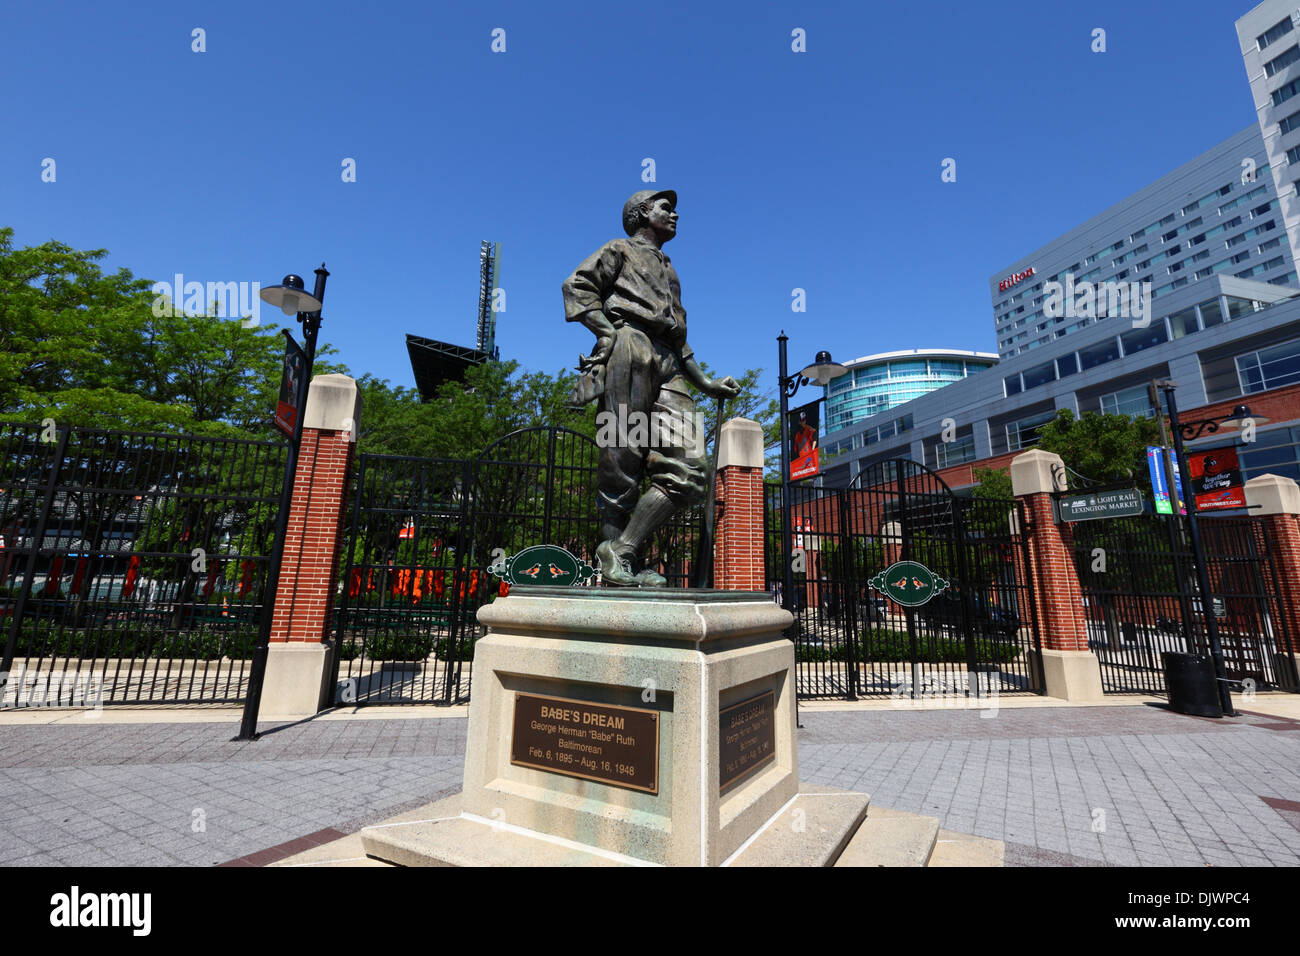 Babe Ruth 'Babe's Dream' statue outside Oriole Park (home of Baltimore Orioles), Hilton Hotel in background, Baltimore, USA Stock Photo